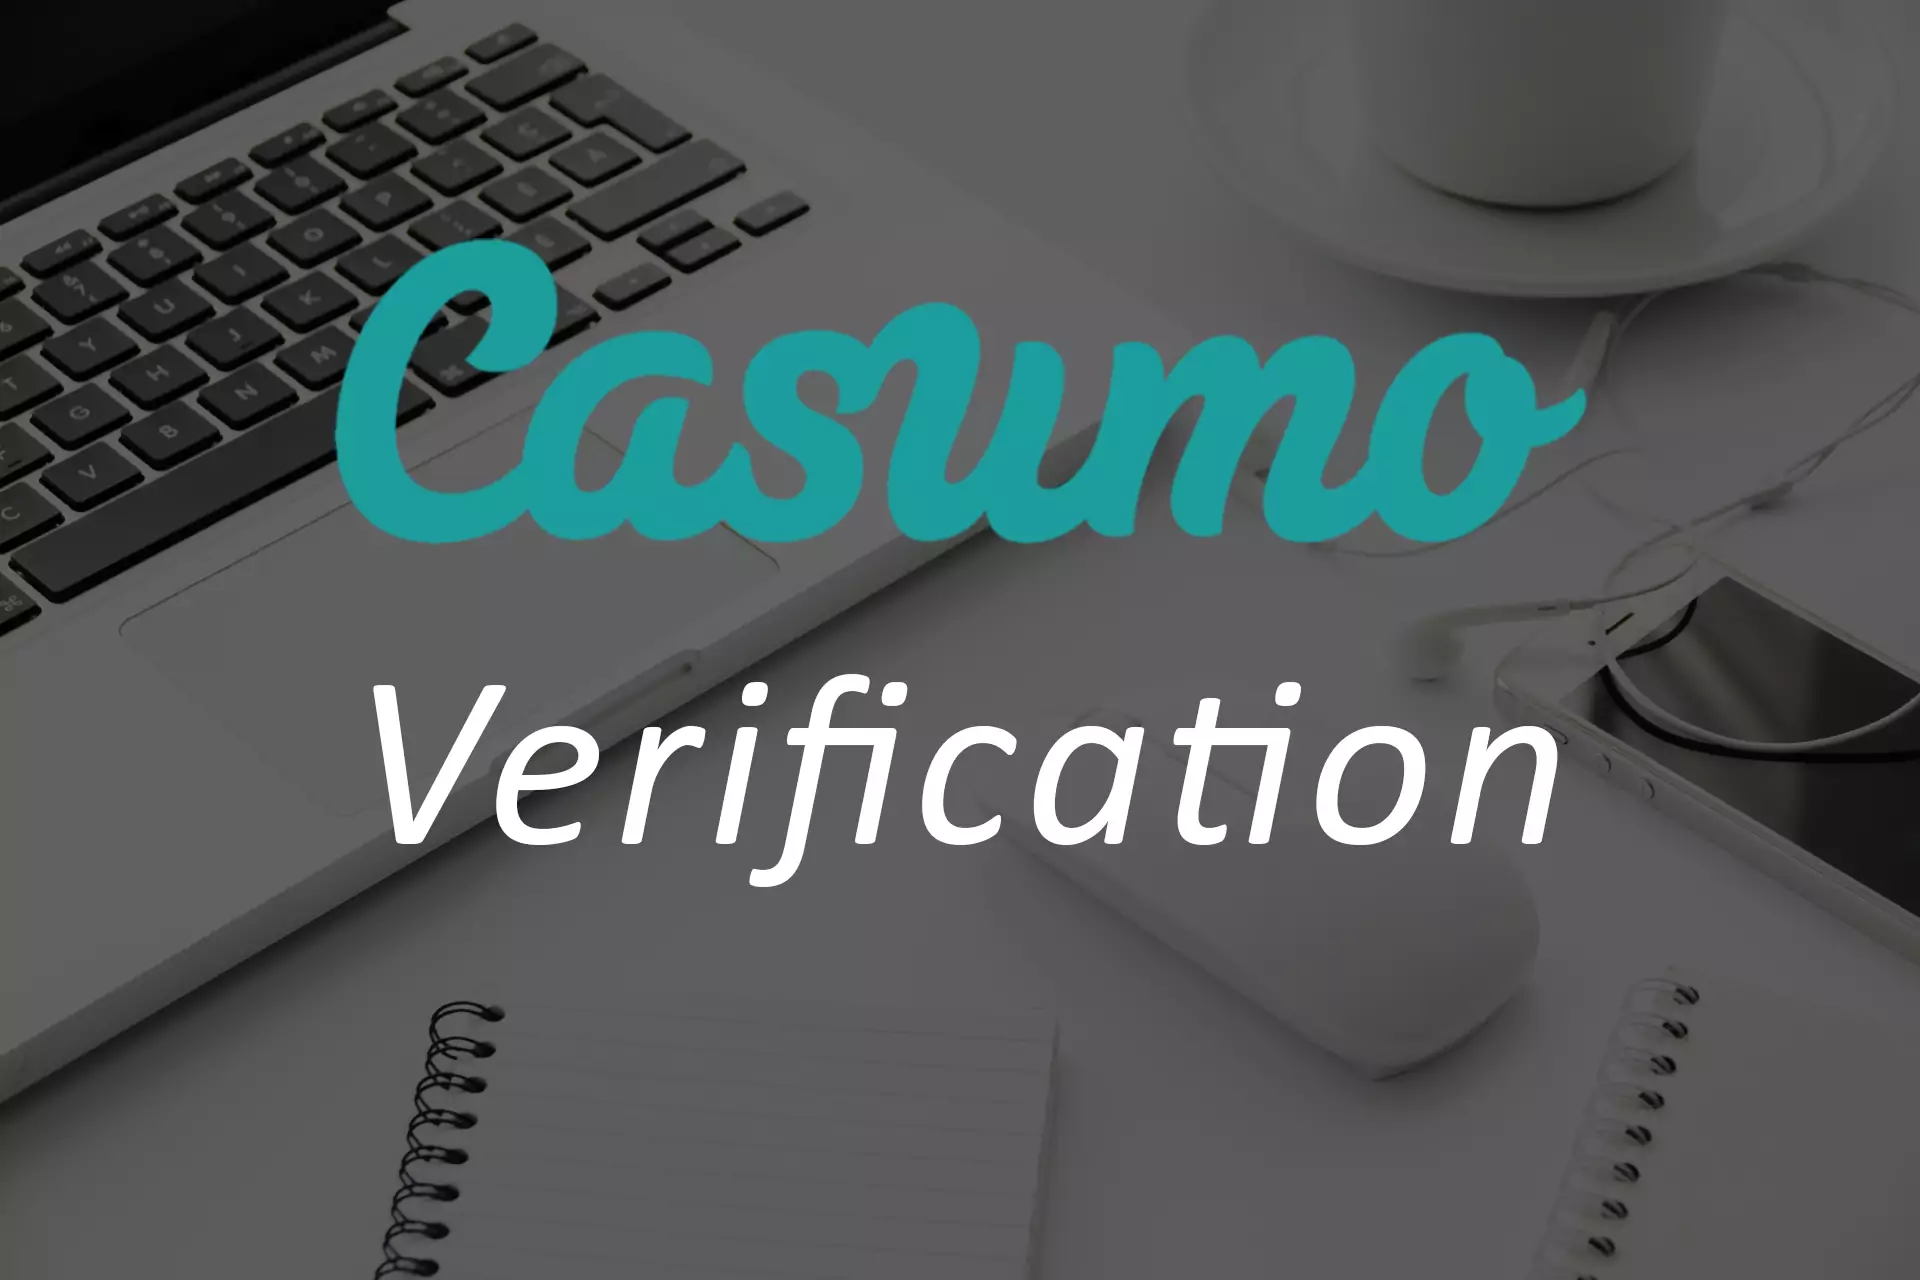 To place bets and play casino games you need to verify your account.